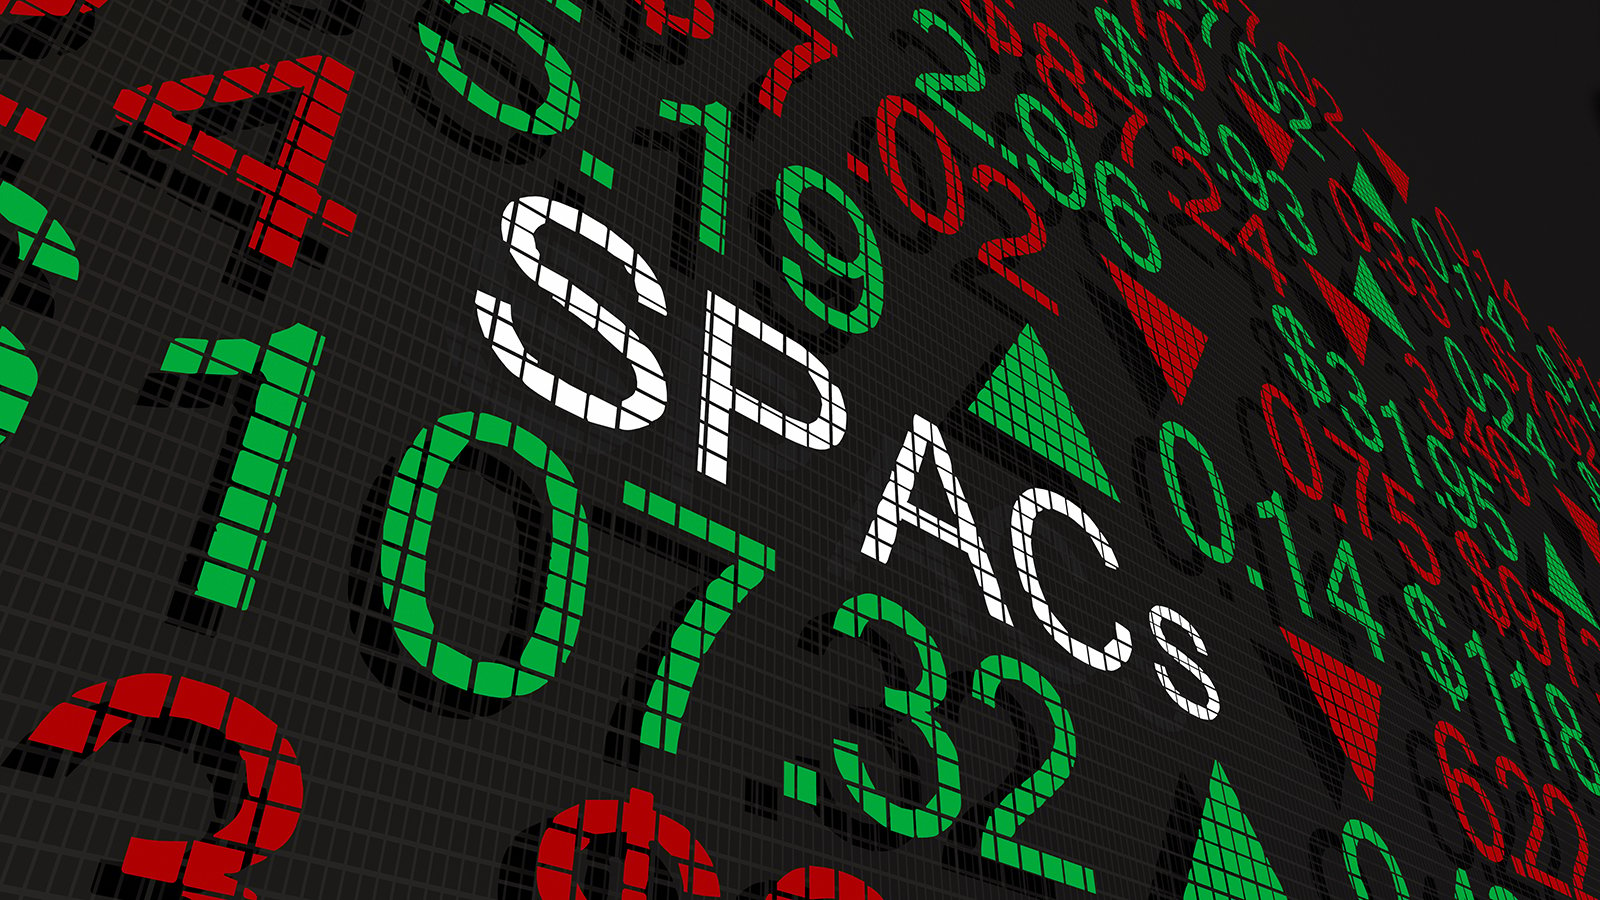 BAER Stock. A 3D illustration of the word SPACs on a stock board full of numbers and up and down arrows.